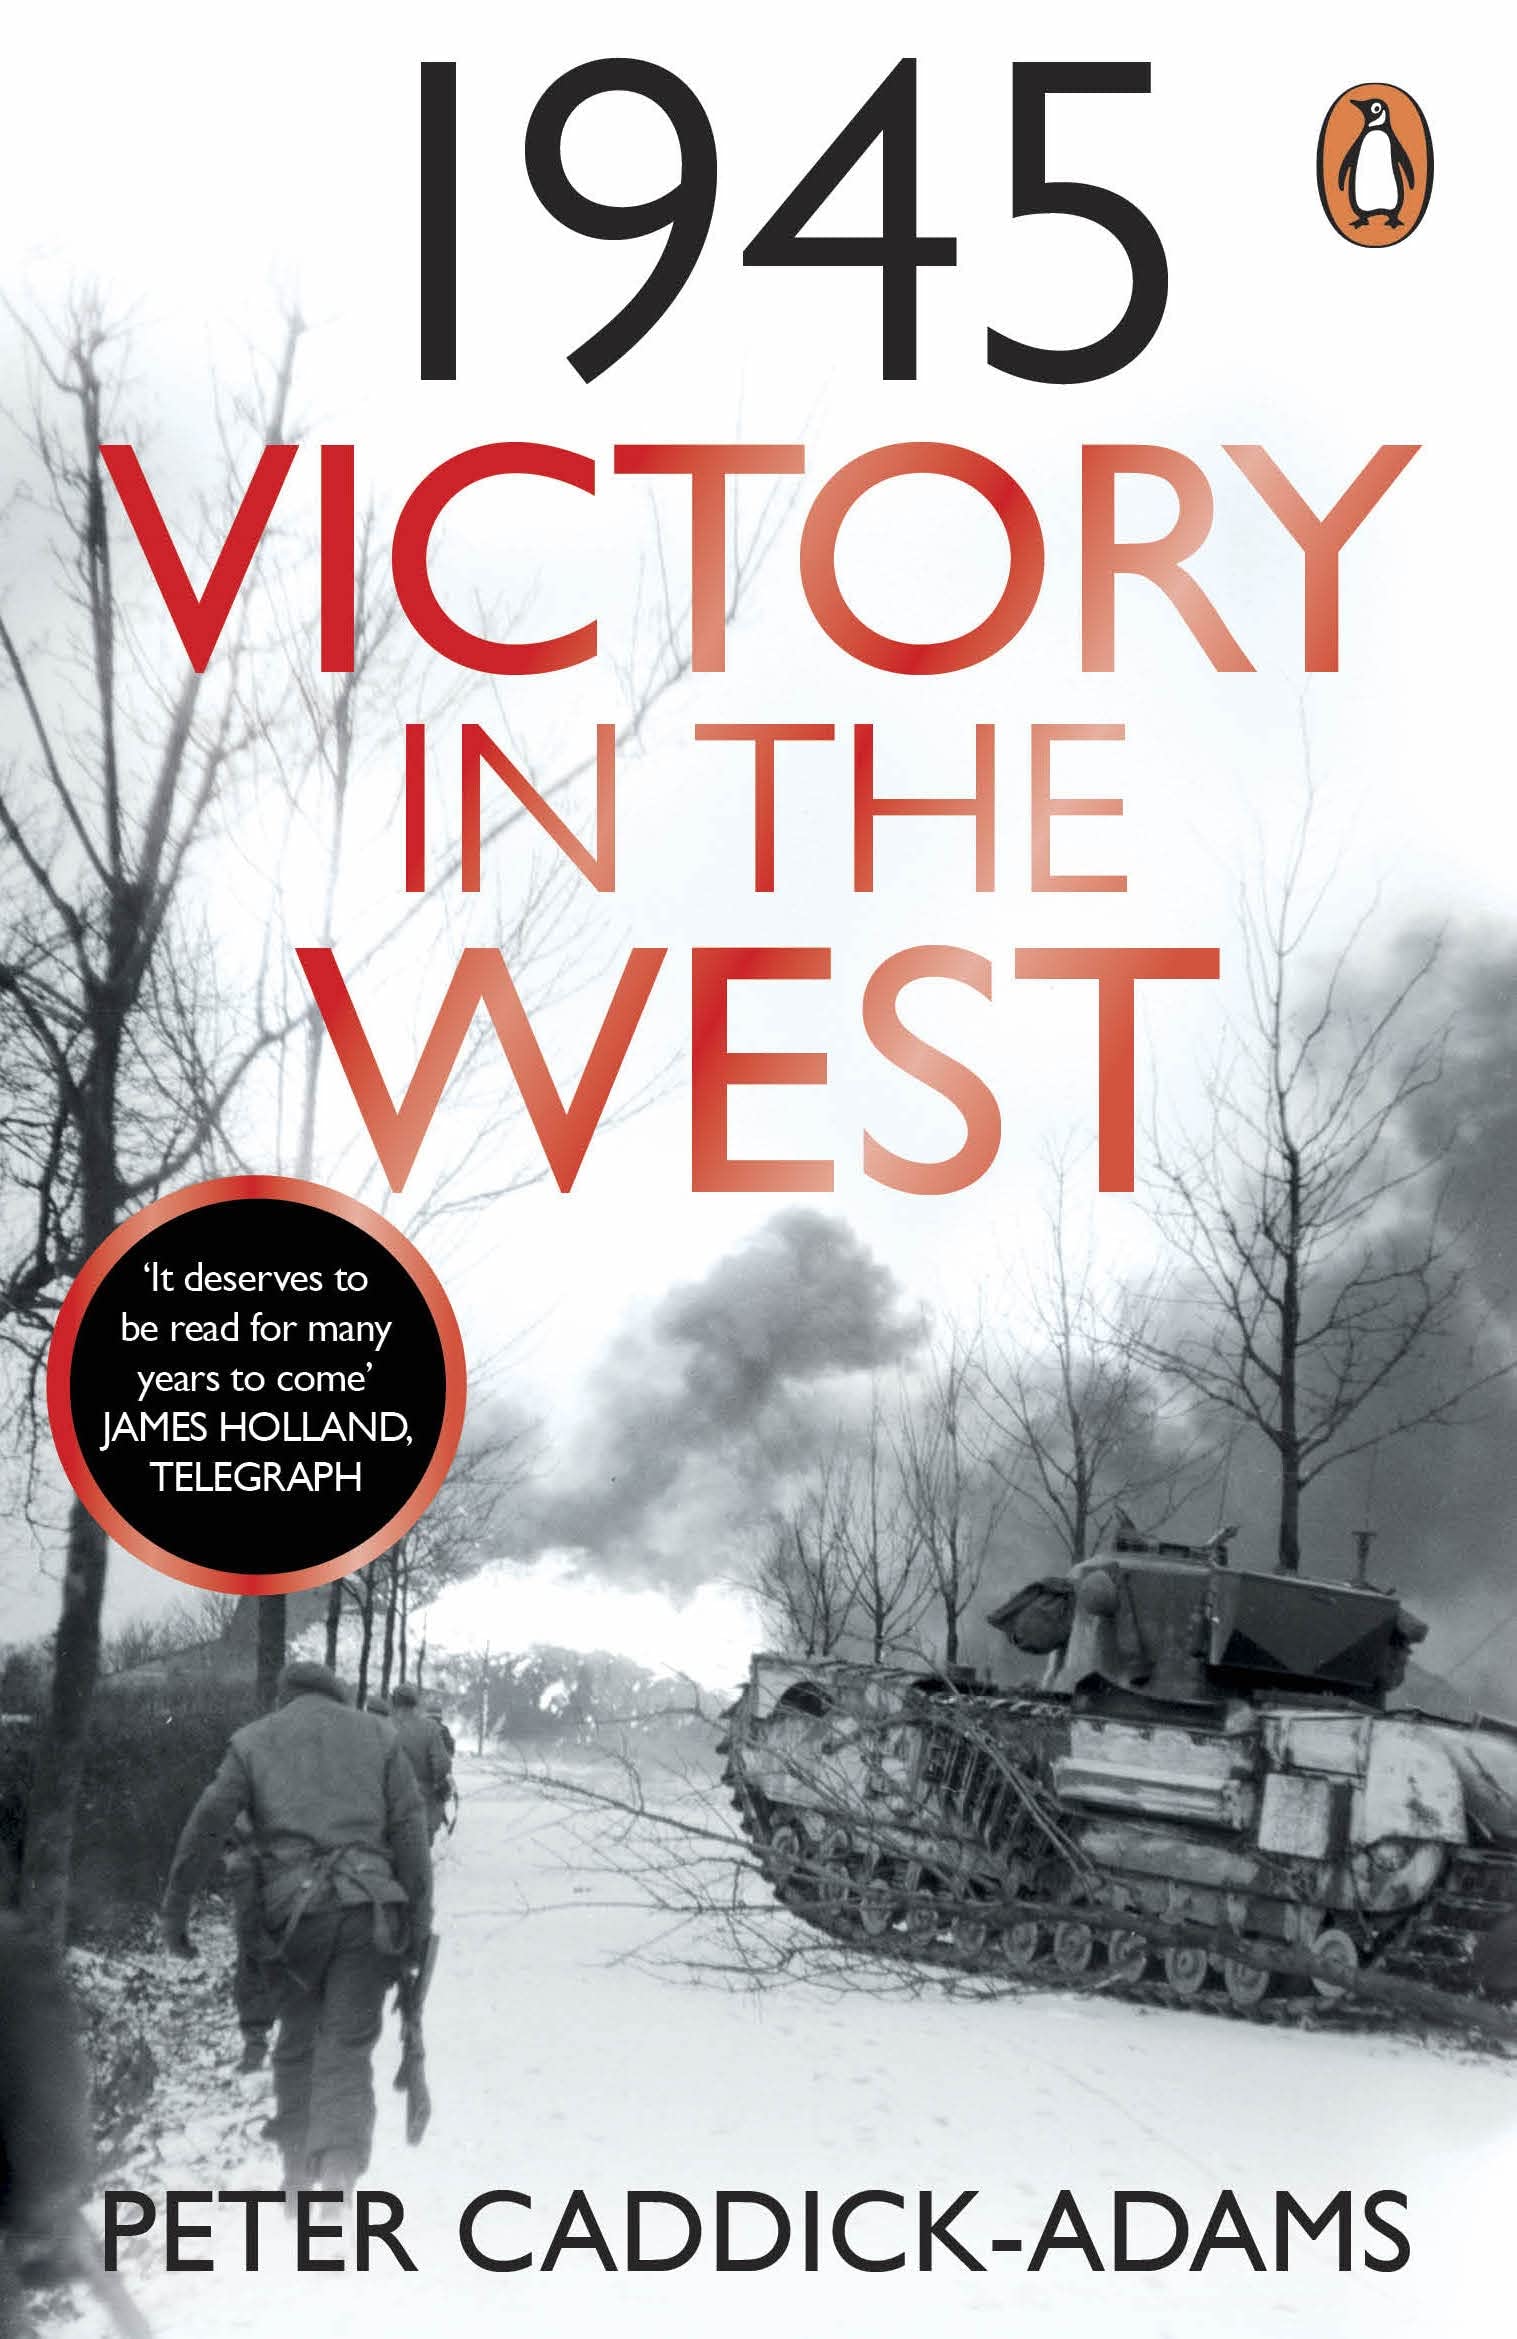 1945 victory in the west paperback book cover